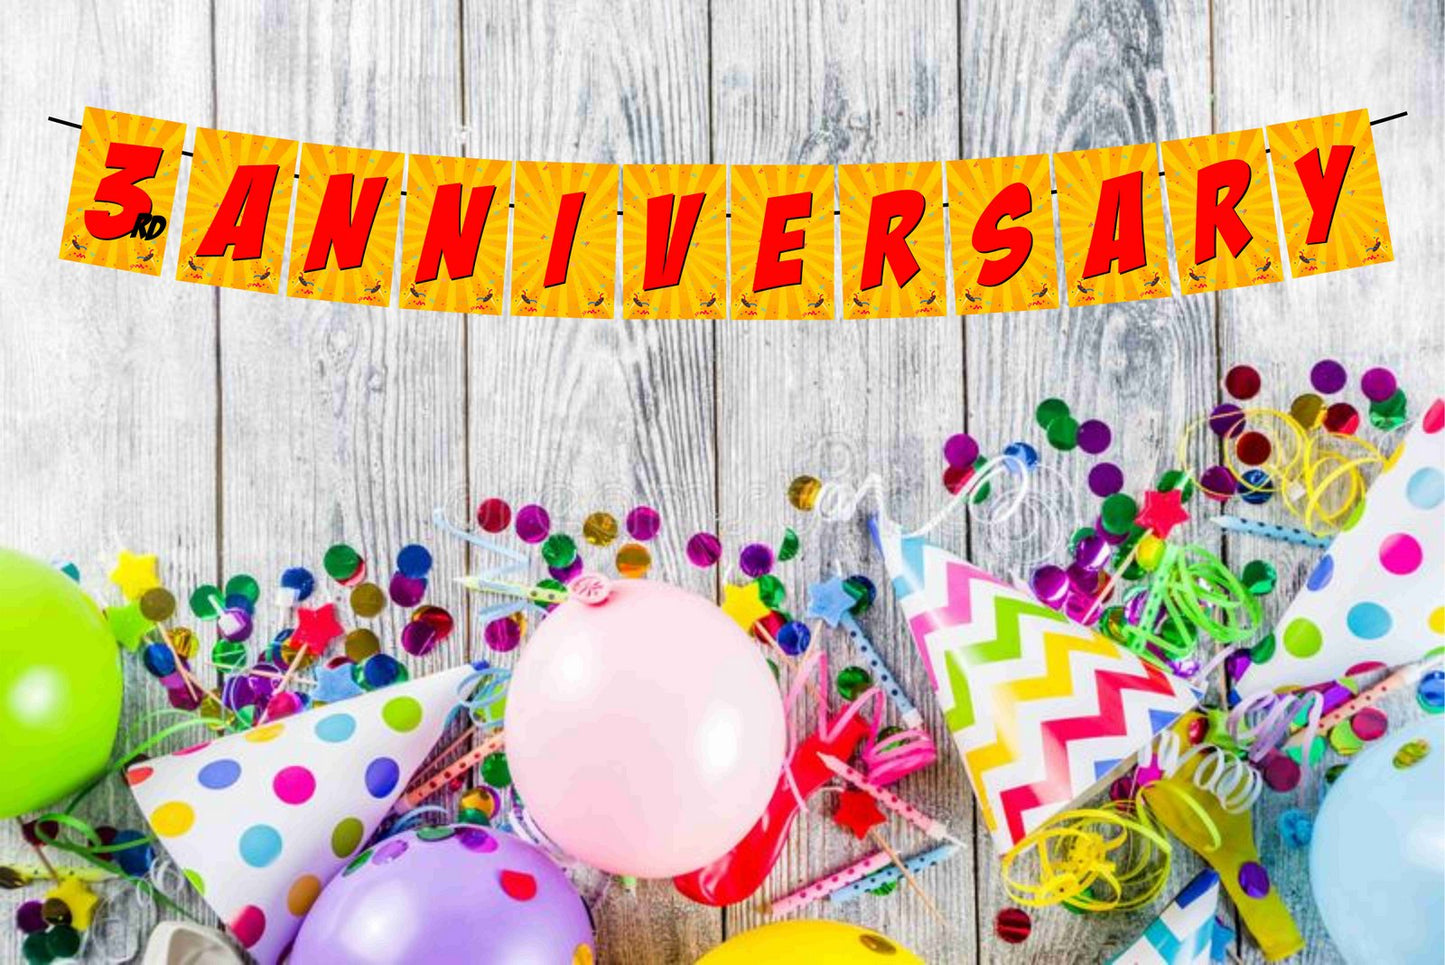 3rd Happy Anniversary Banner Anniversary Decoration Backdrop Photo Shoot Party Item